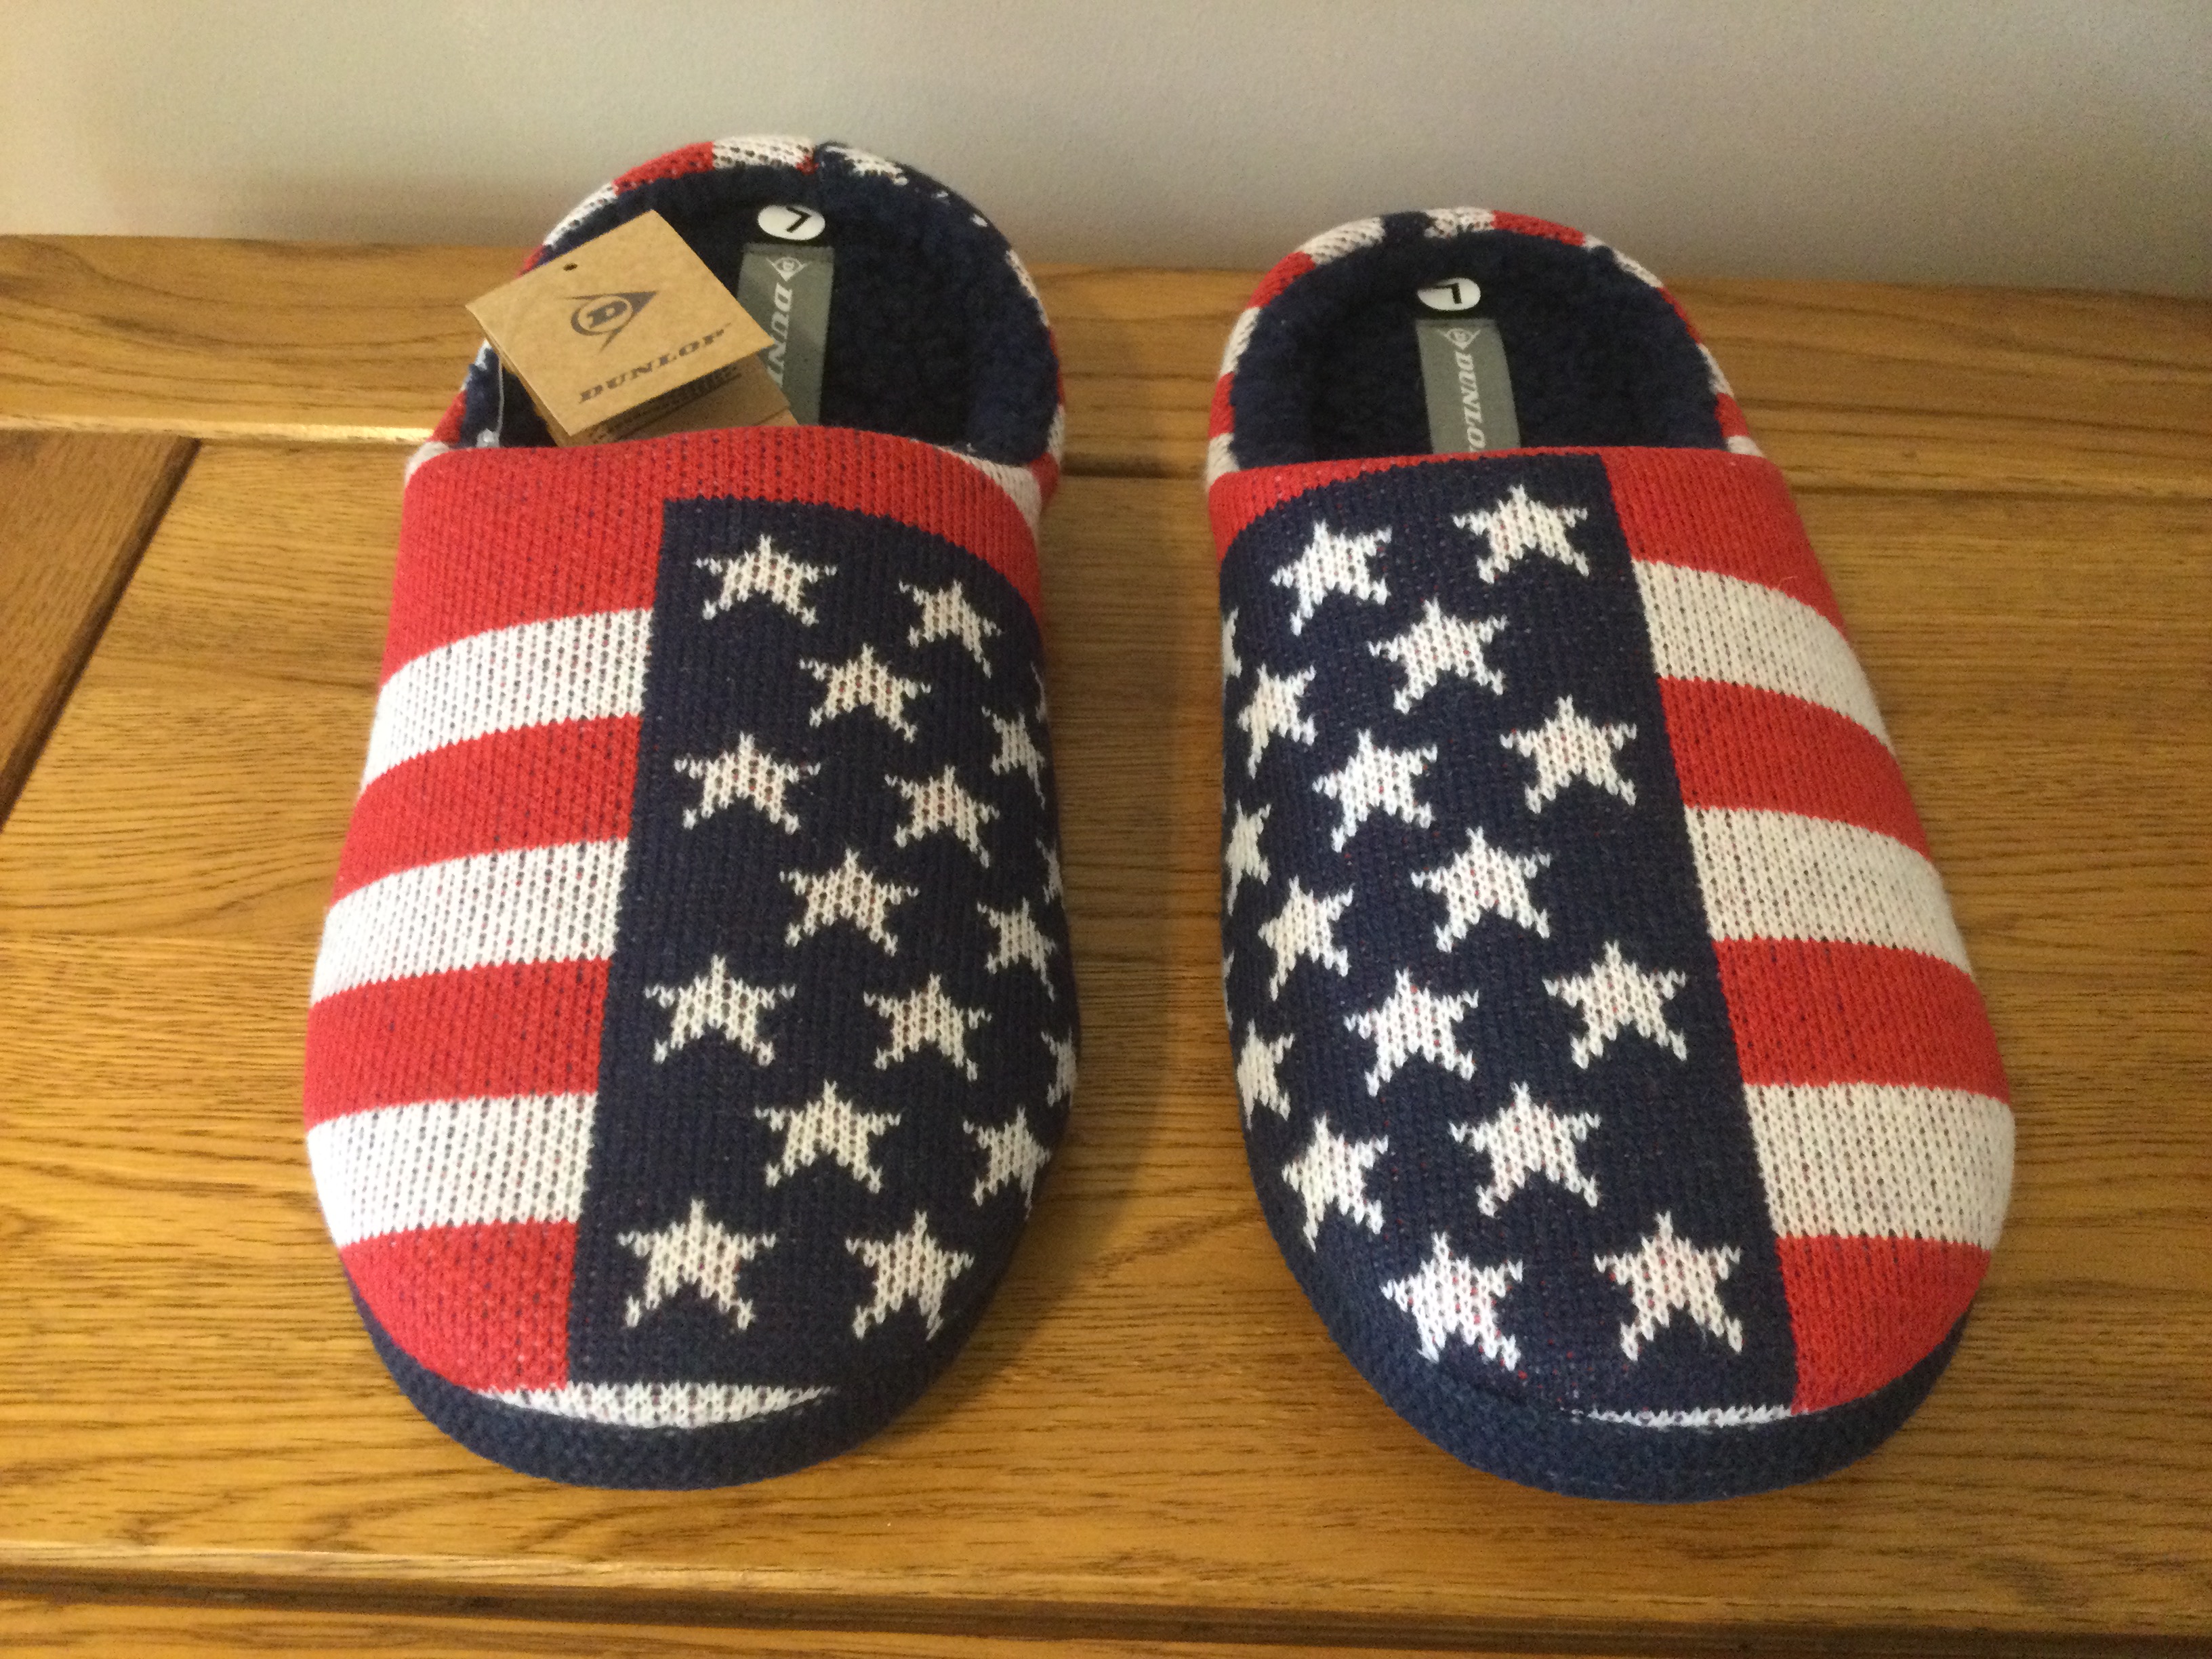 Men's Dunlop, “USA Stars and Stripes” Memory Foam, Mule Slippers, Size L (10/11) - New - Image 3 of 5